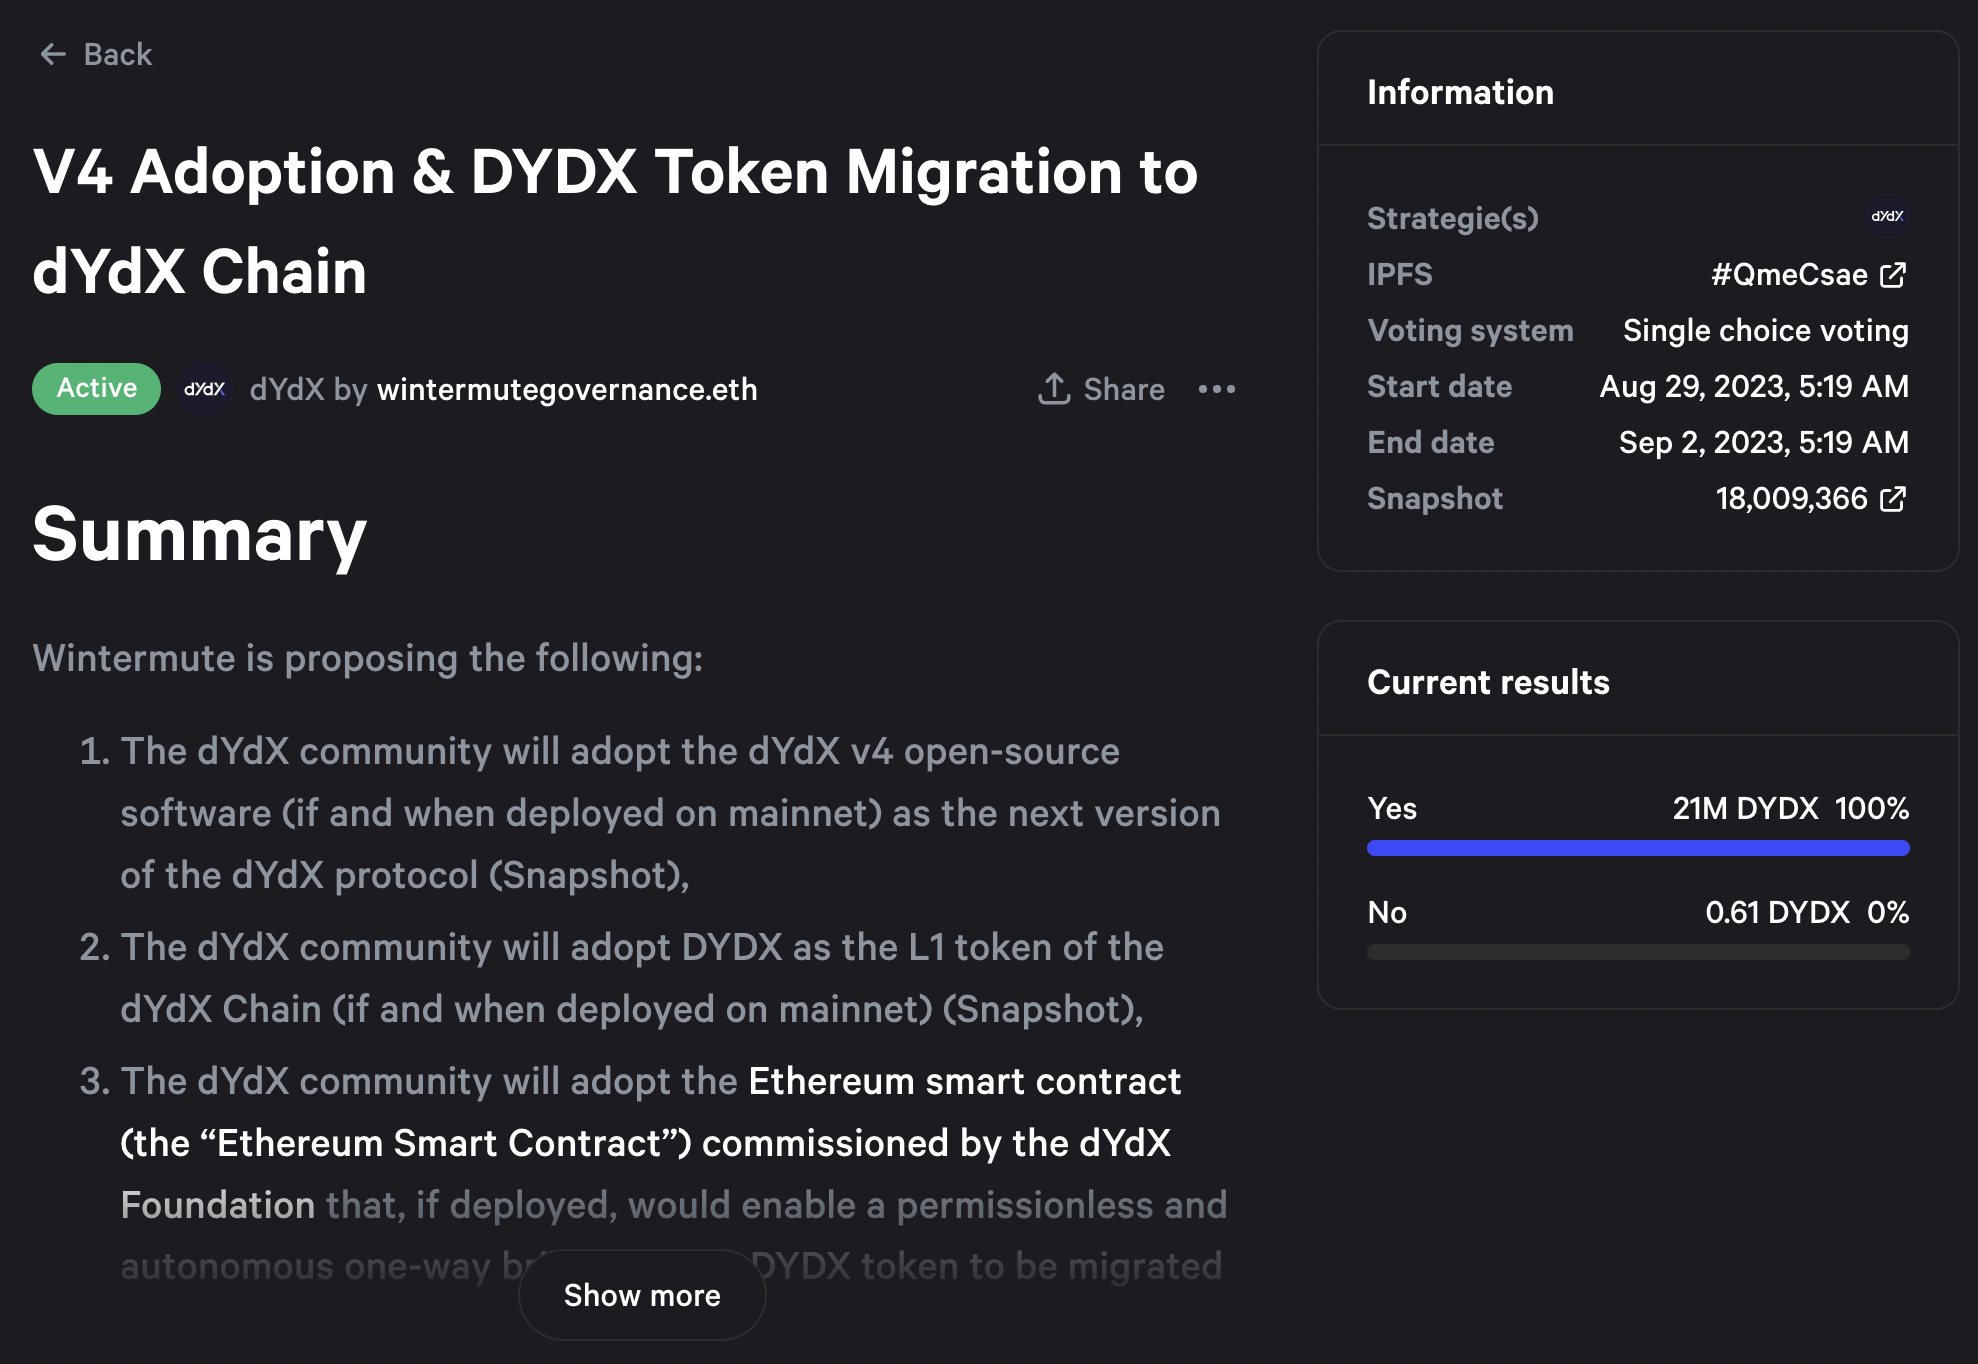 V4 adoption and migration to dYdX chain